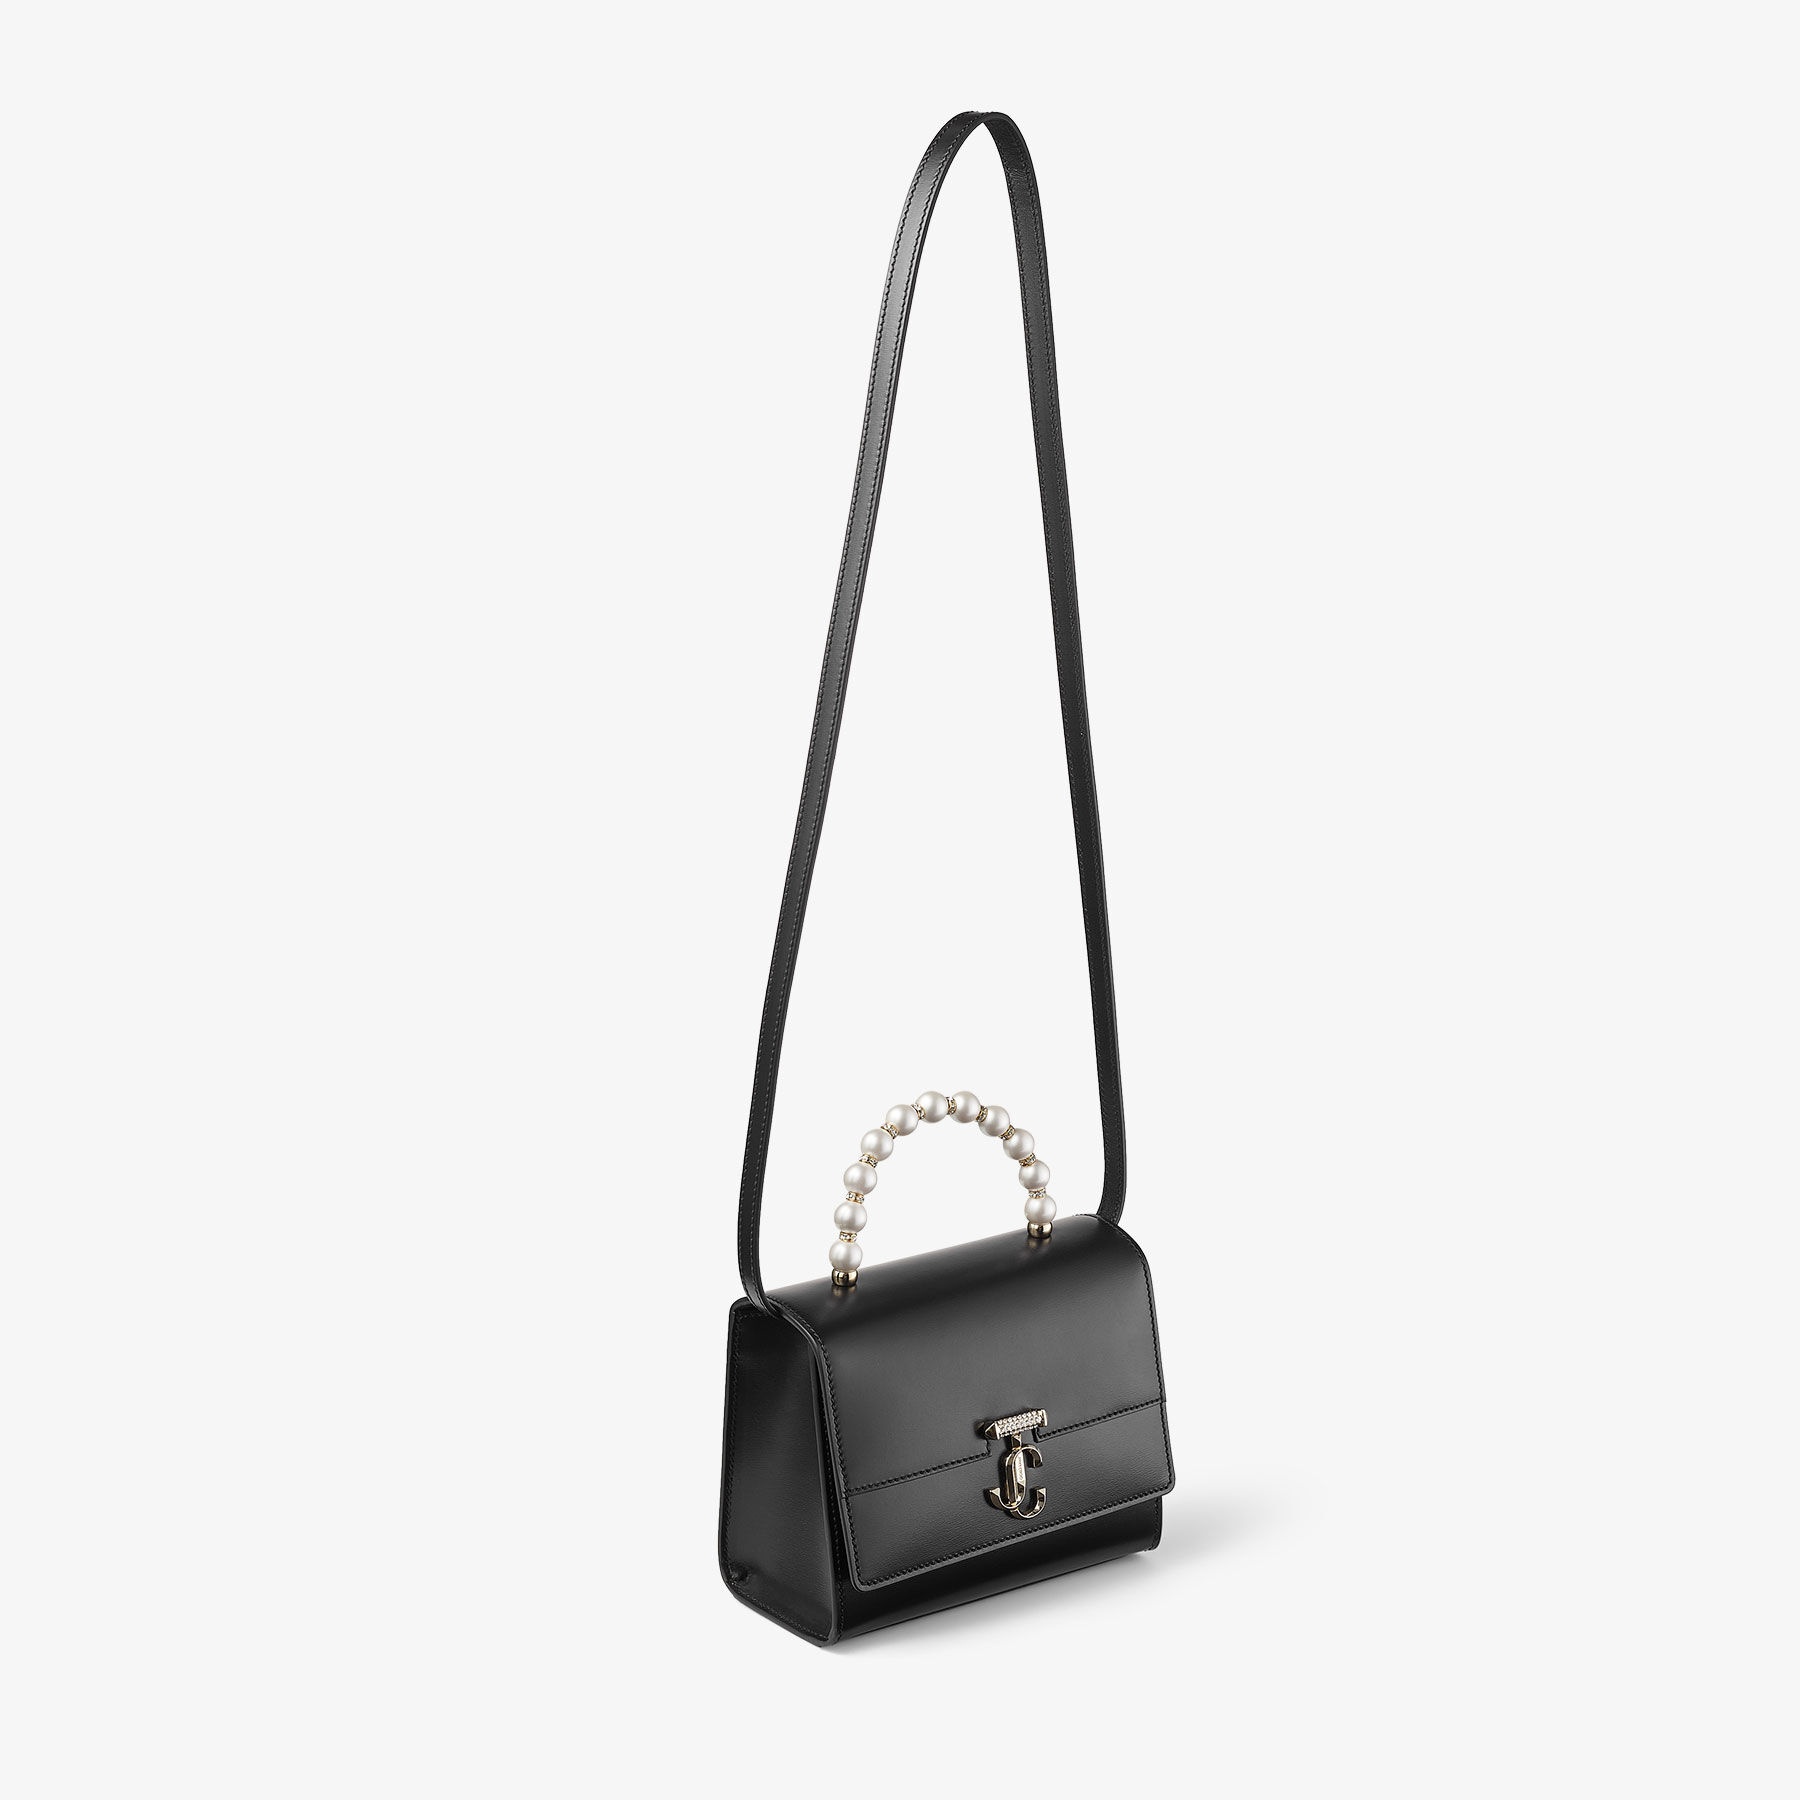 Avenue Top Handle/S
Black Box Leather Top Handle Bag with Pearls - 5